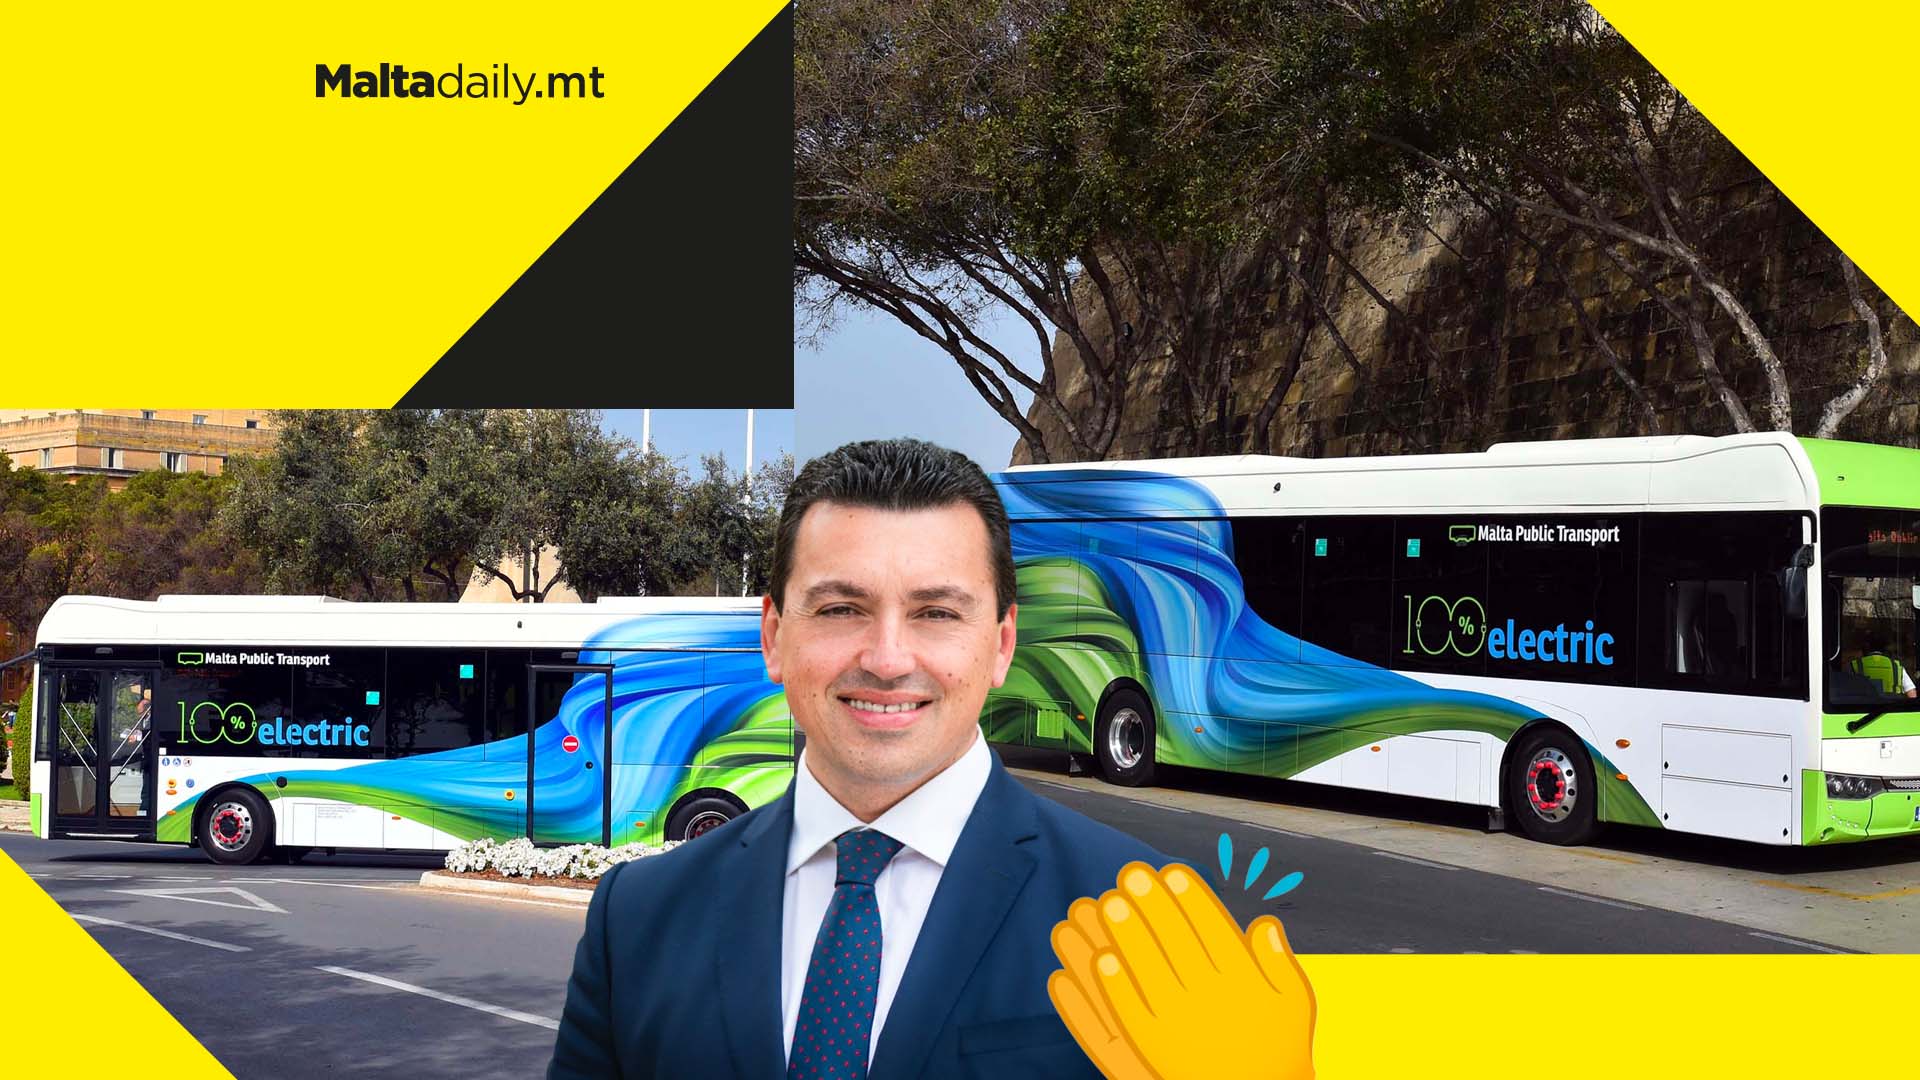 Two new electric buses join Malta’s public transport fleet